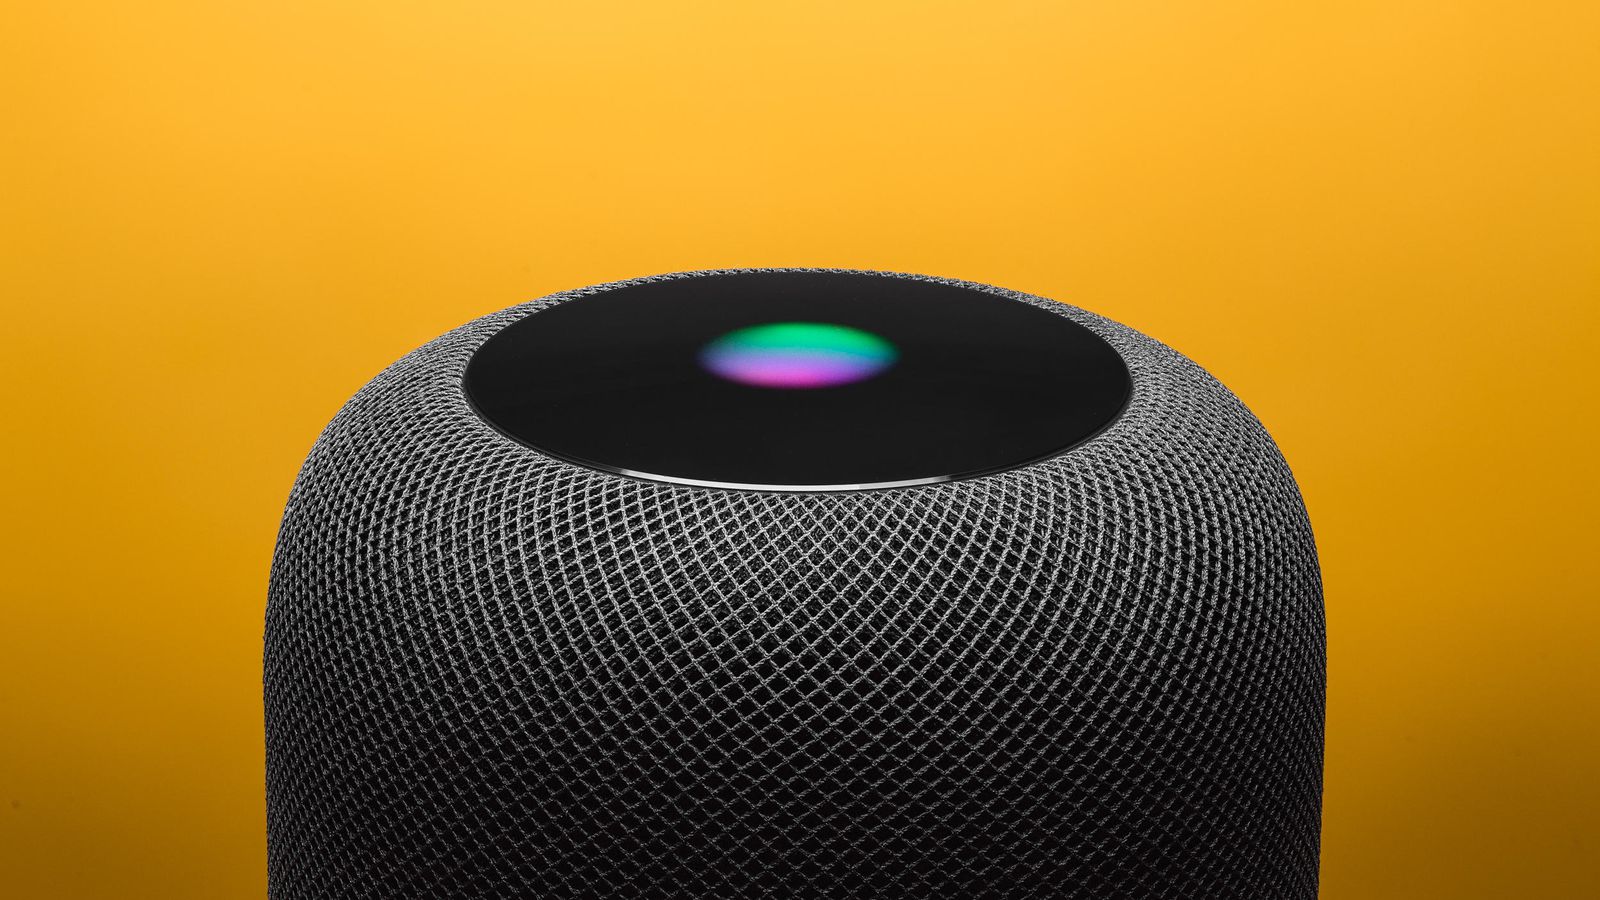 Apple discontinues the original HomePod; to focus on HomePod mini